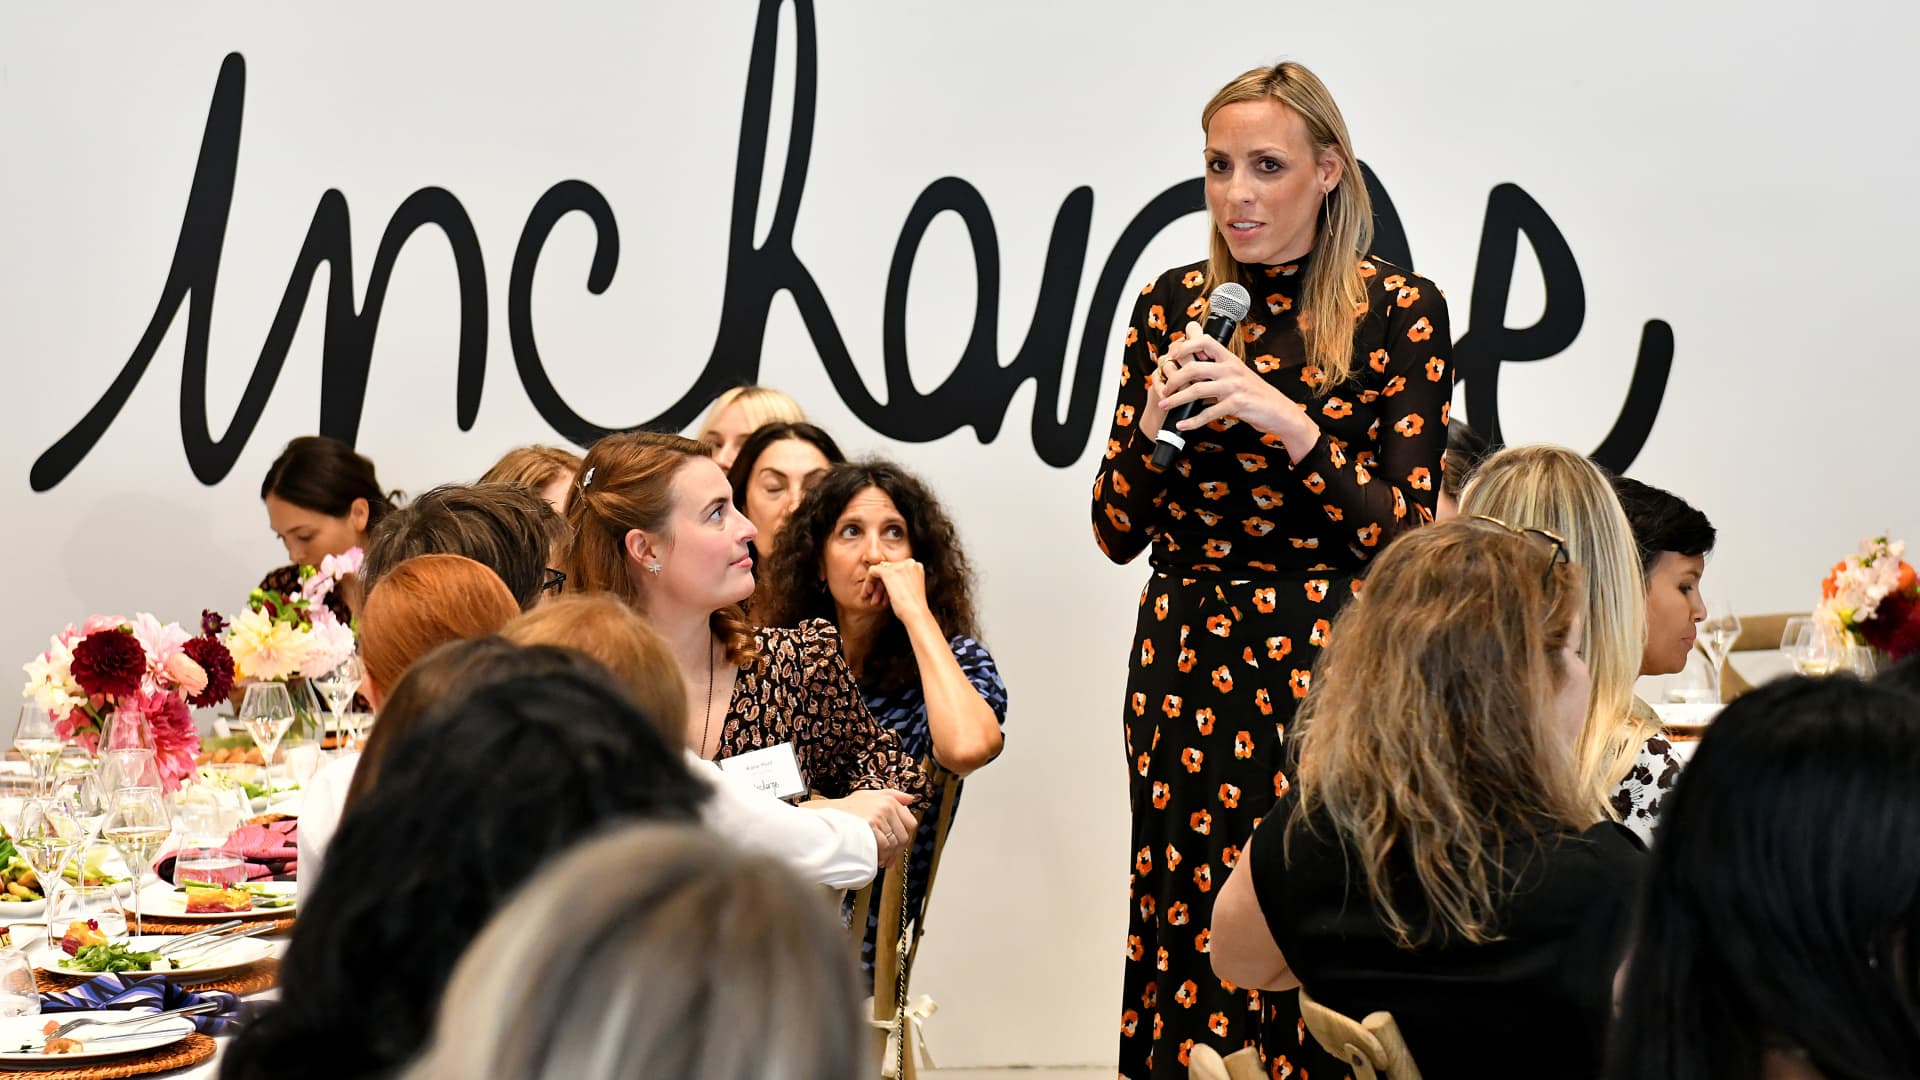 The Helm's Lindsey Taylor Wood speaks at a Sept. 5, 2019 In Charge Luncheon hosted by Diane von Furstenberg and LinkedIn in New York.